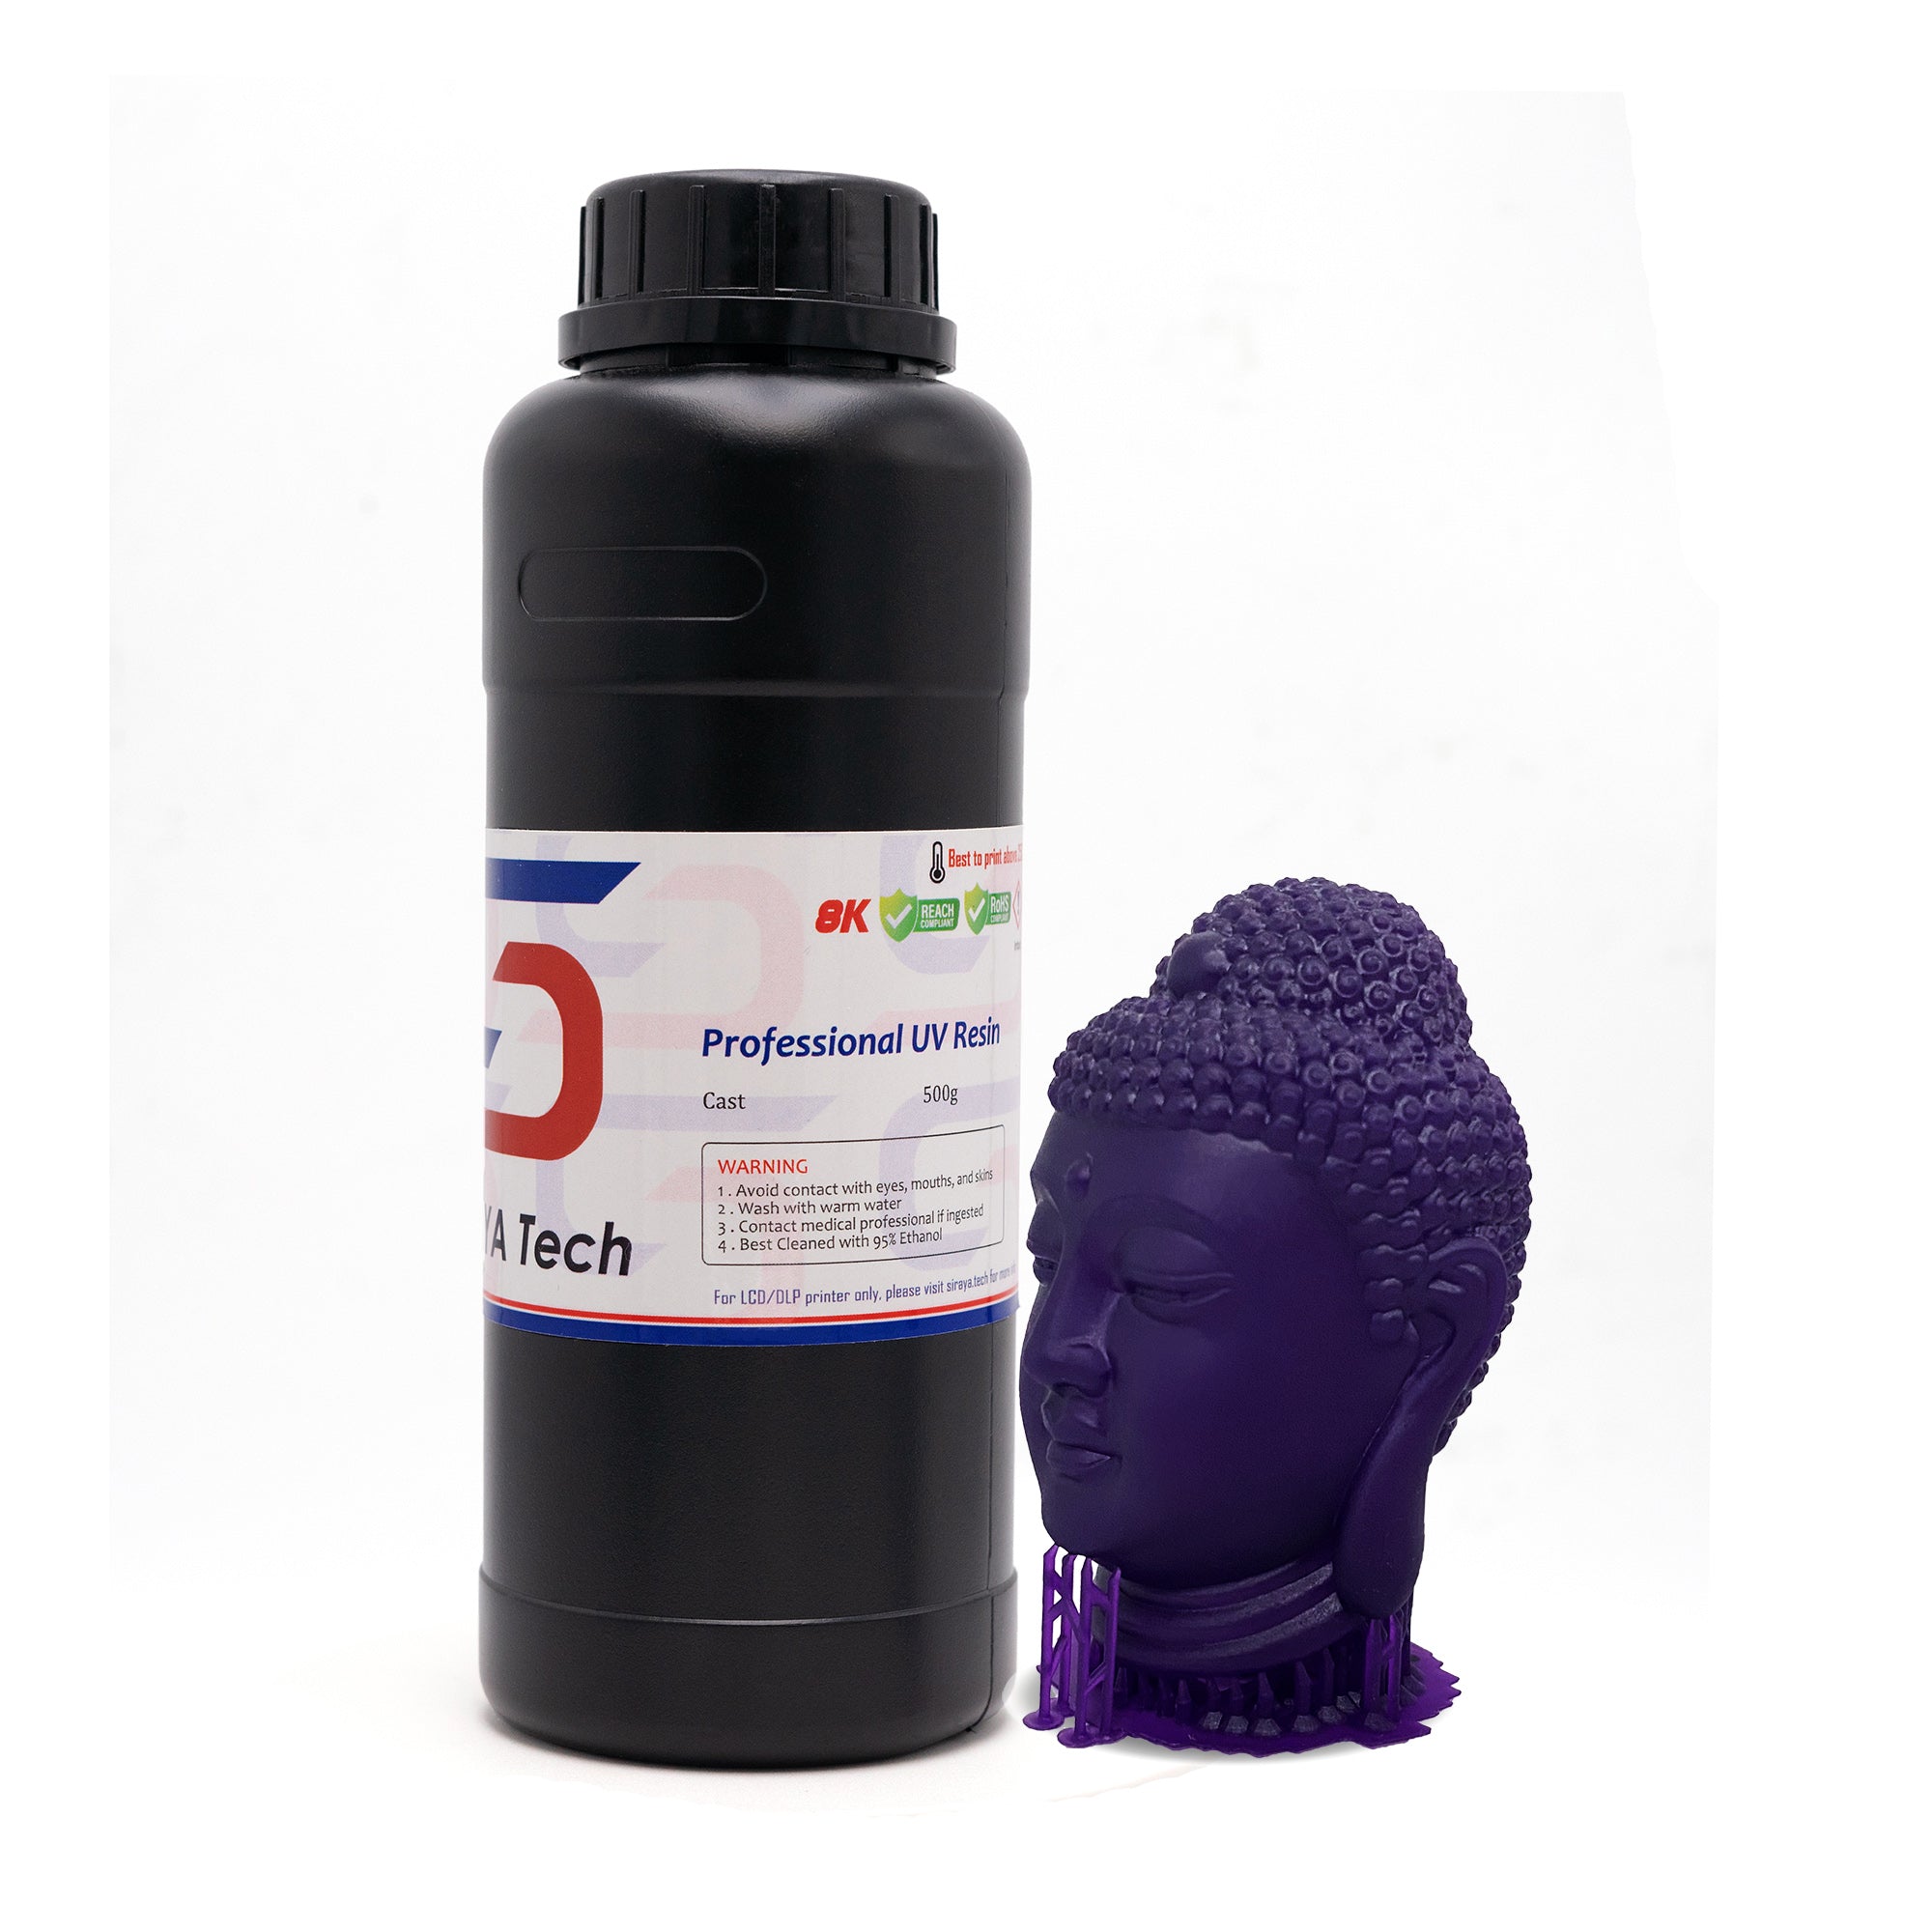 ≡ Siraya Tech Cast - Castable resin 1kg buy at a low price with